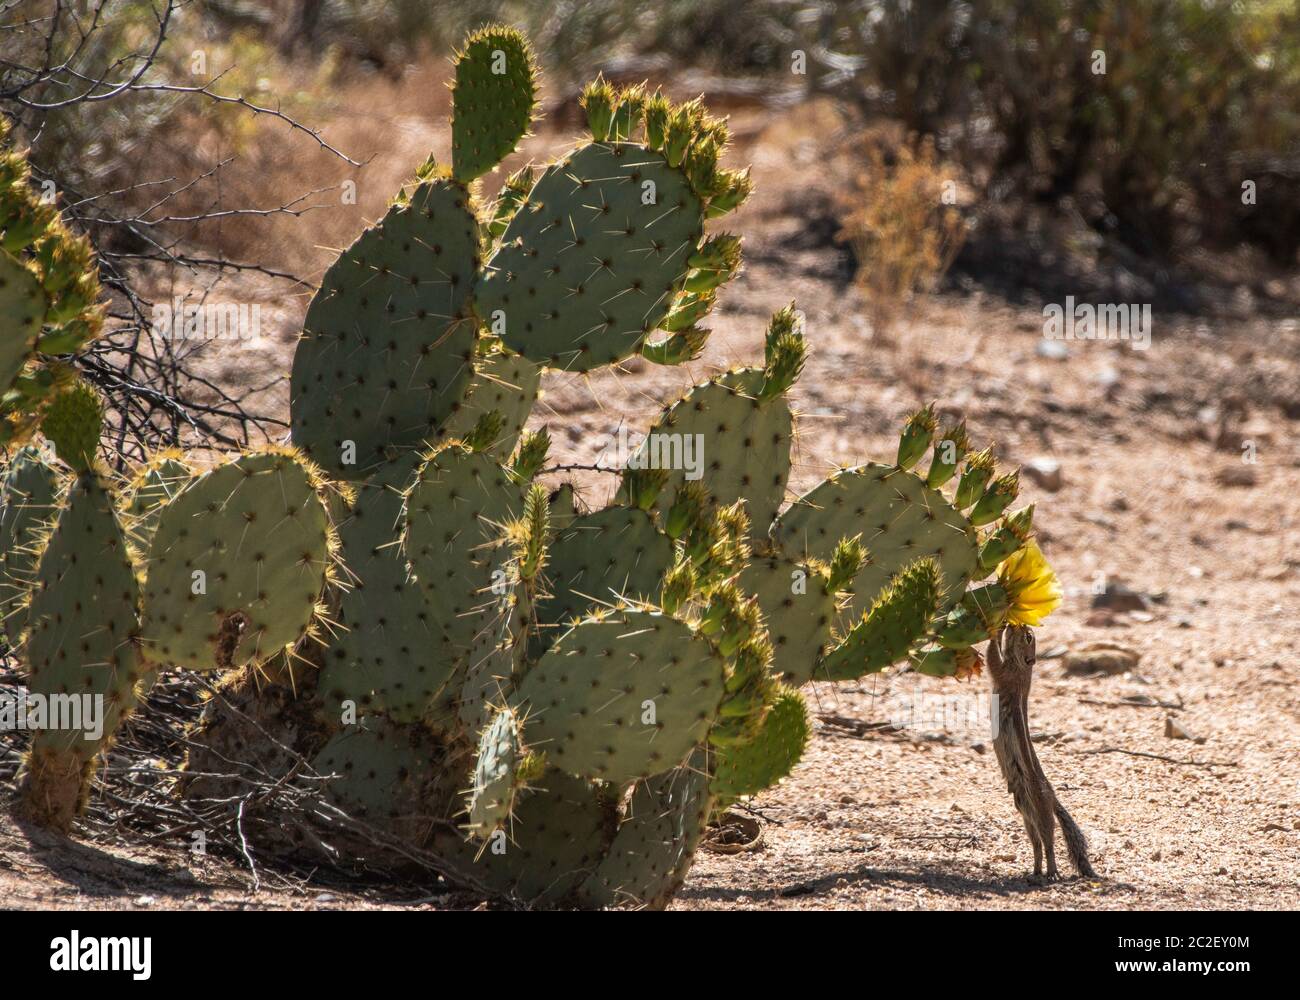 Yuma Antelope Squirrel, Ammospermophilus harrisi, feeds on flowers of an Engelmann's Prickly Pear cactus, Opuntia phaeacantha, in Saguaro National Par Stock Photo